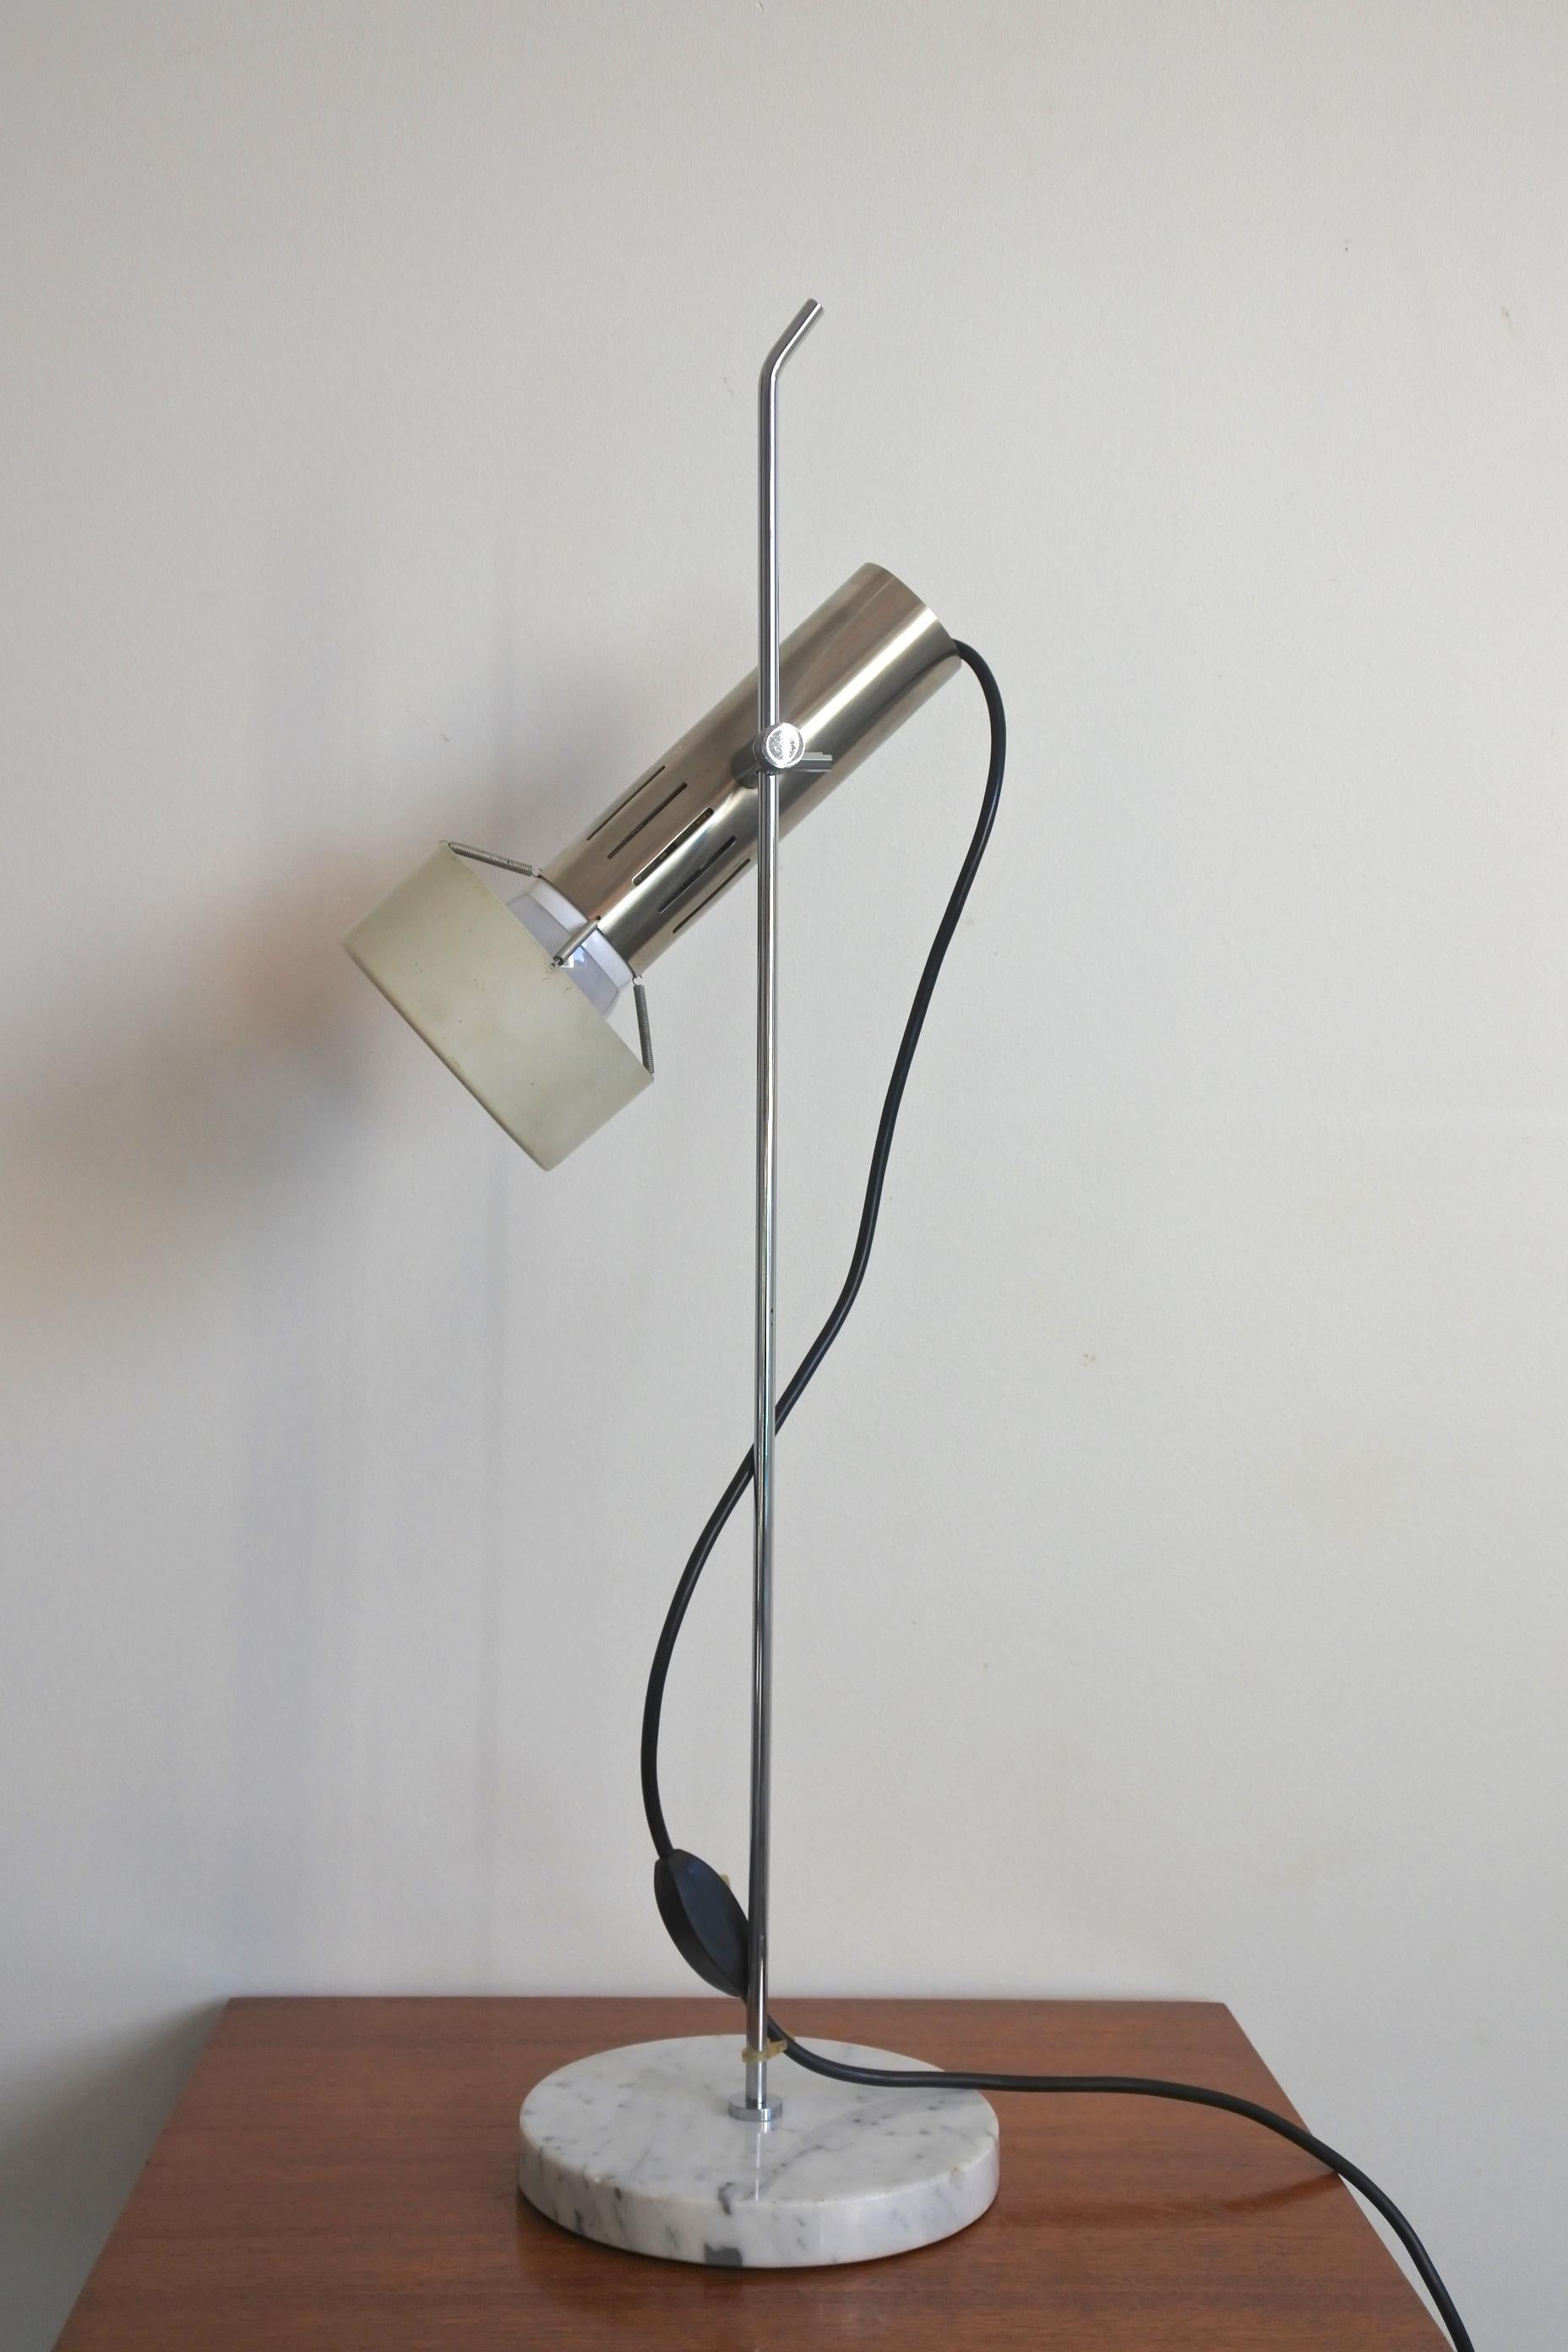 Table lamp by French designer Alain Richard.
Edited by Disderot in 1958.
Model A4.
Chromed and lacquered metal, brushed steel and marble.
Fully original and complete.
Great avant-gardist design.

Original electrical system. To be safe, the lamp